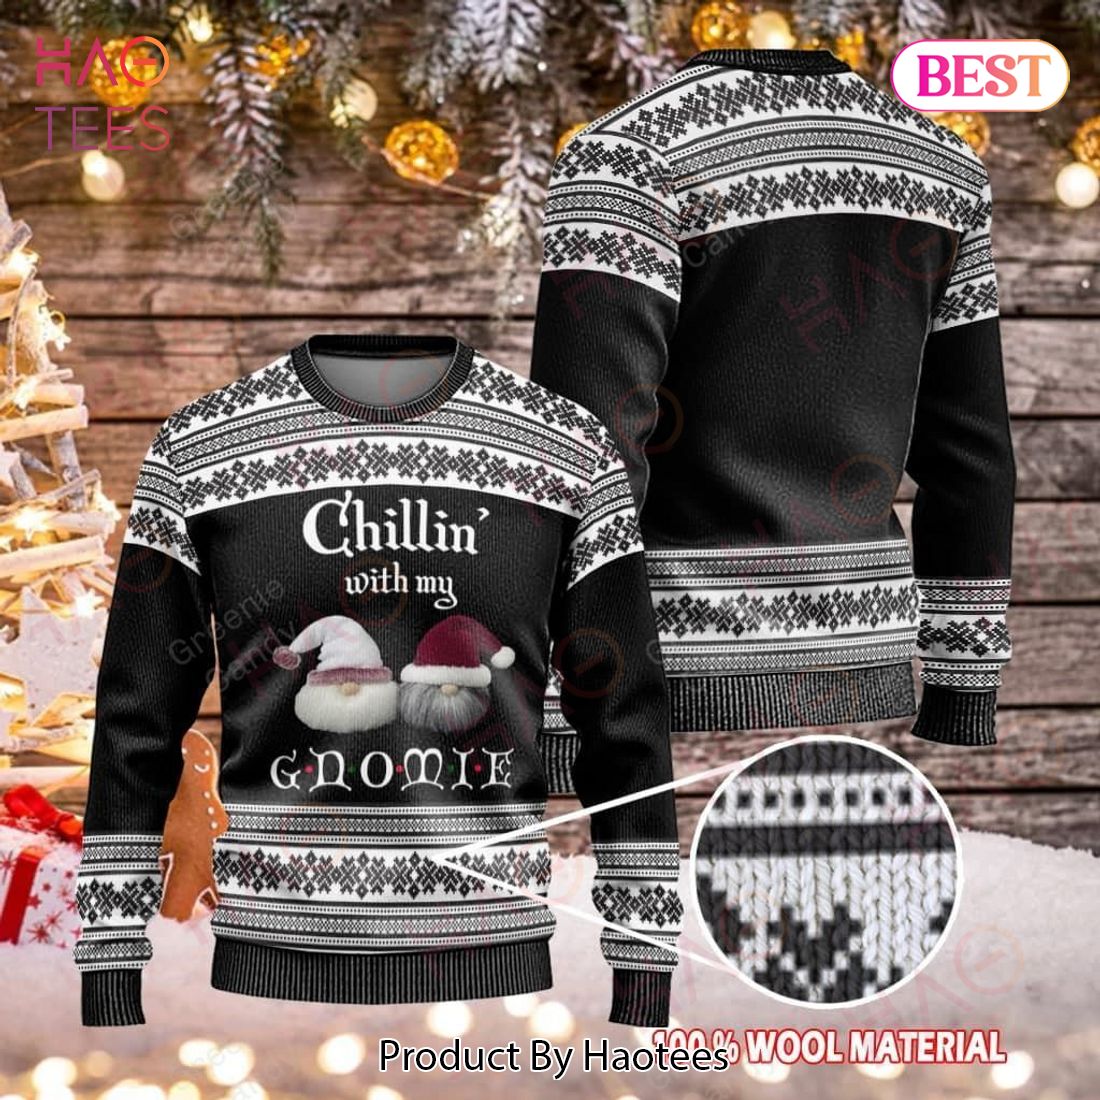 Gifury Gnome Christmas Ugly Sweater Chilling With My Gnomie Christmas Pattern Black White Sweater Gnome Apparel 2022